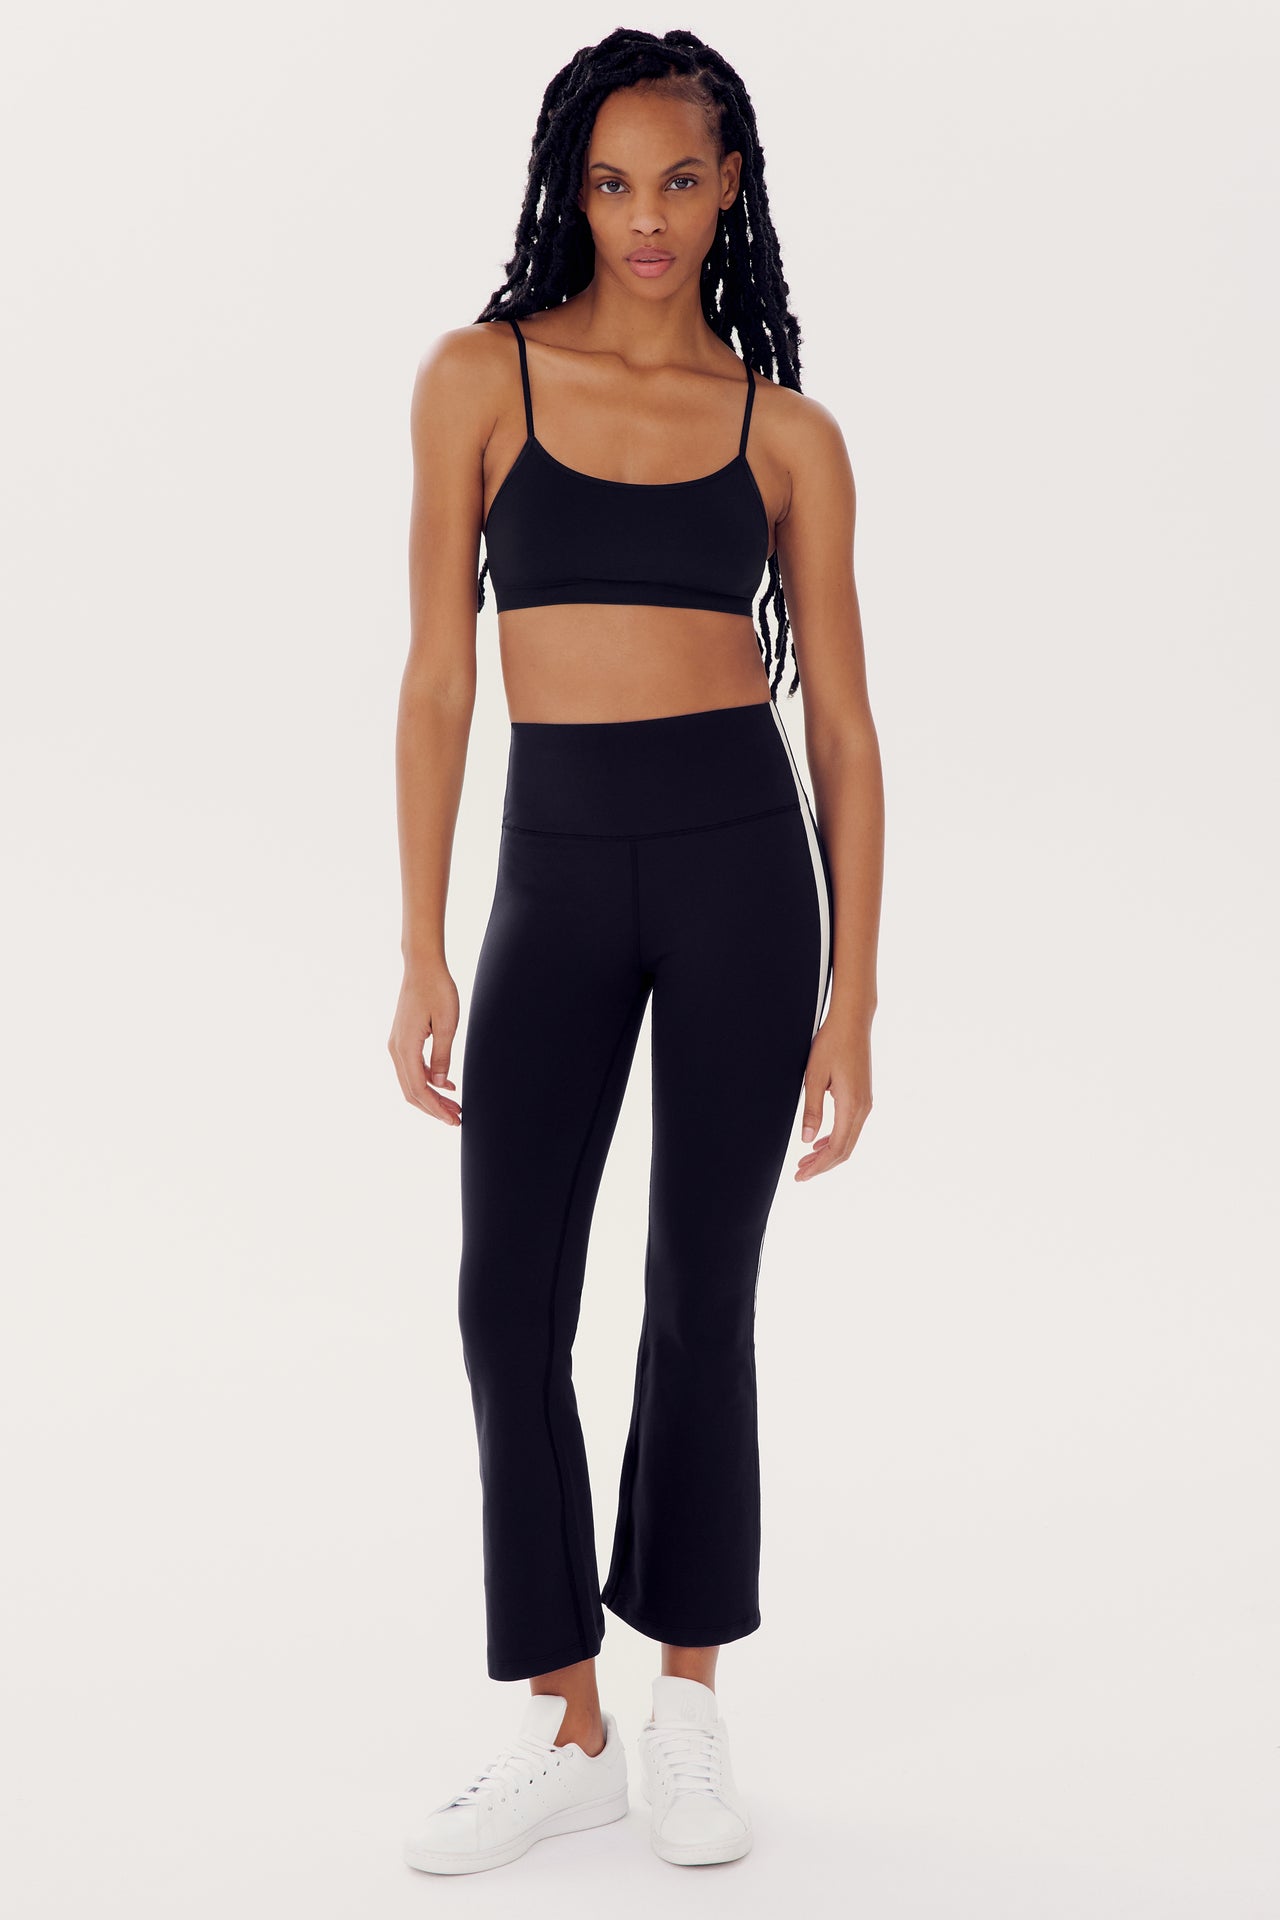 A person with long braided hair is wearing a black sports bra made from spandex, SPLITS59 Raquel High Waist Crop - Black/White, and white sneakers, standing against a plain white background.